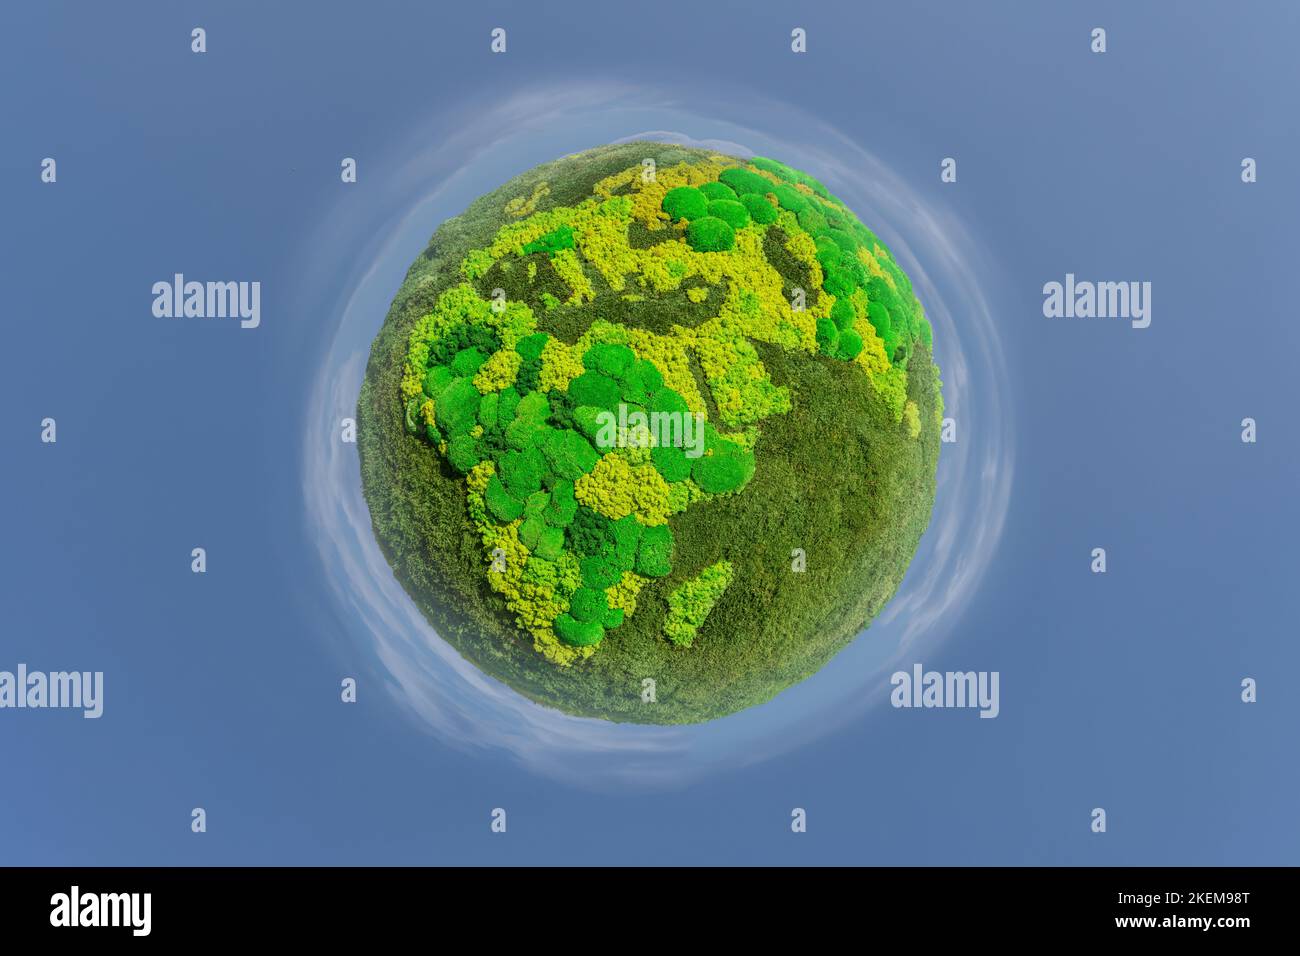 Green planet Earth from natural moss. Symbol of sustainable development and renewable energy Stock Photo